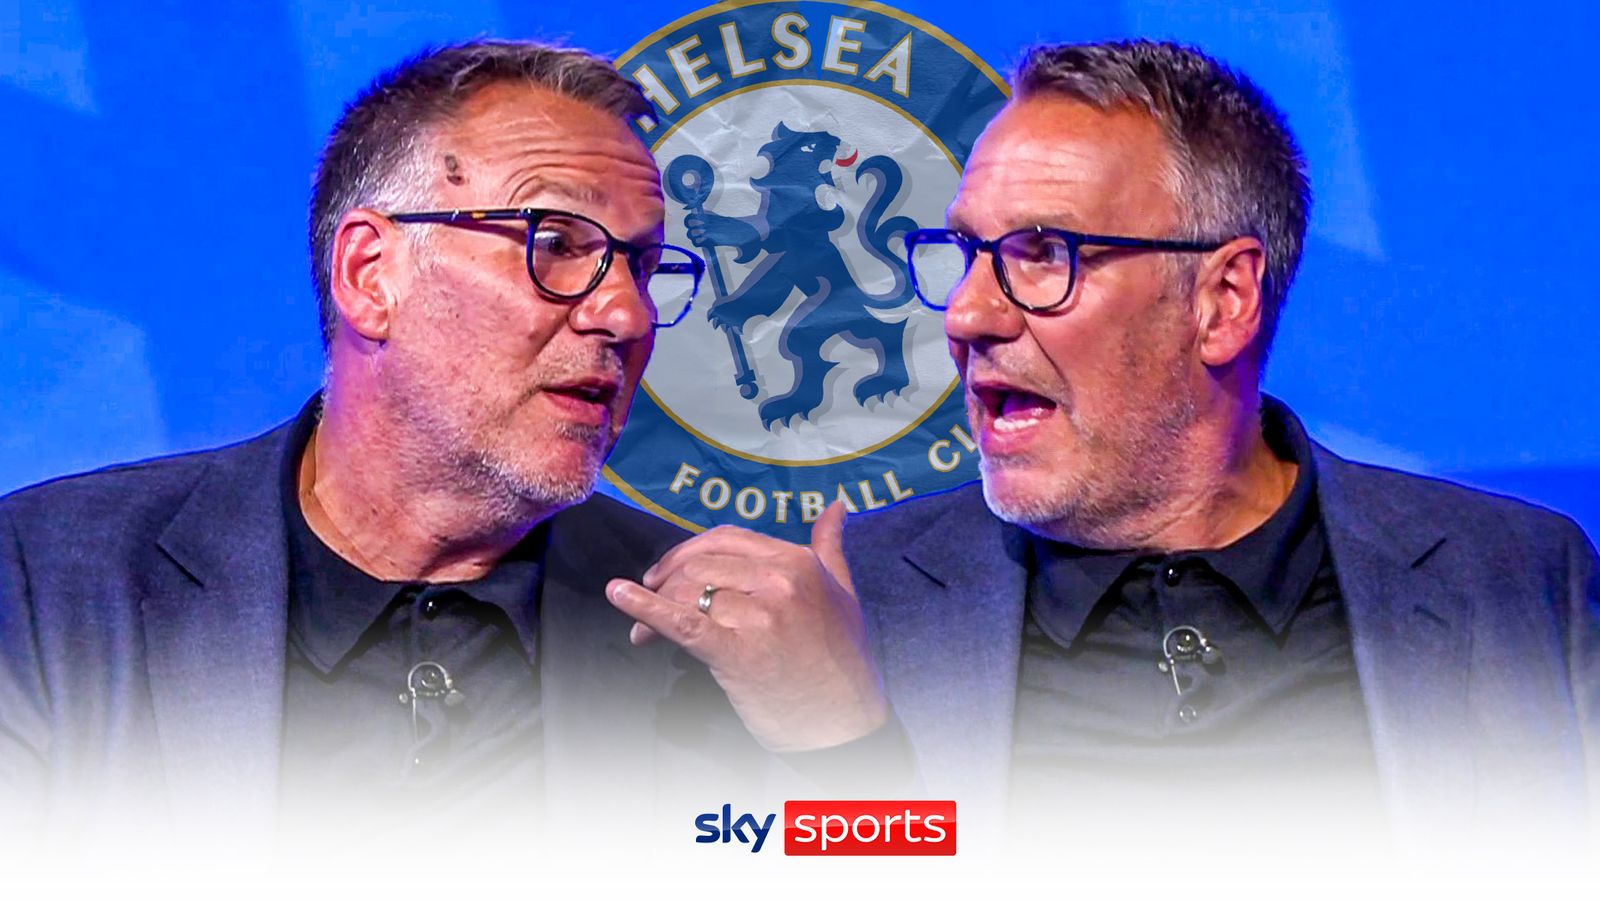 Paul Merson believes Chelsea need a long-term managerial appointment as soon as possible, to replace caretaker manager Frank Lampard.